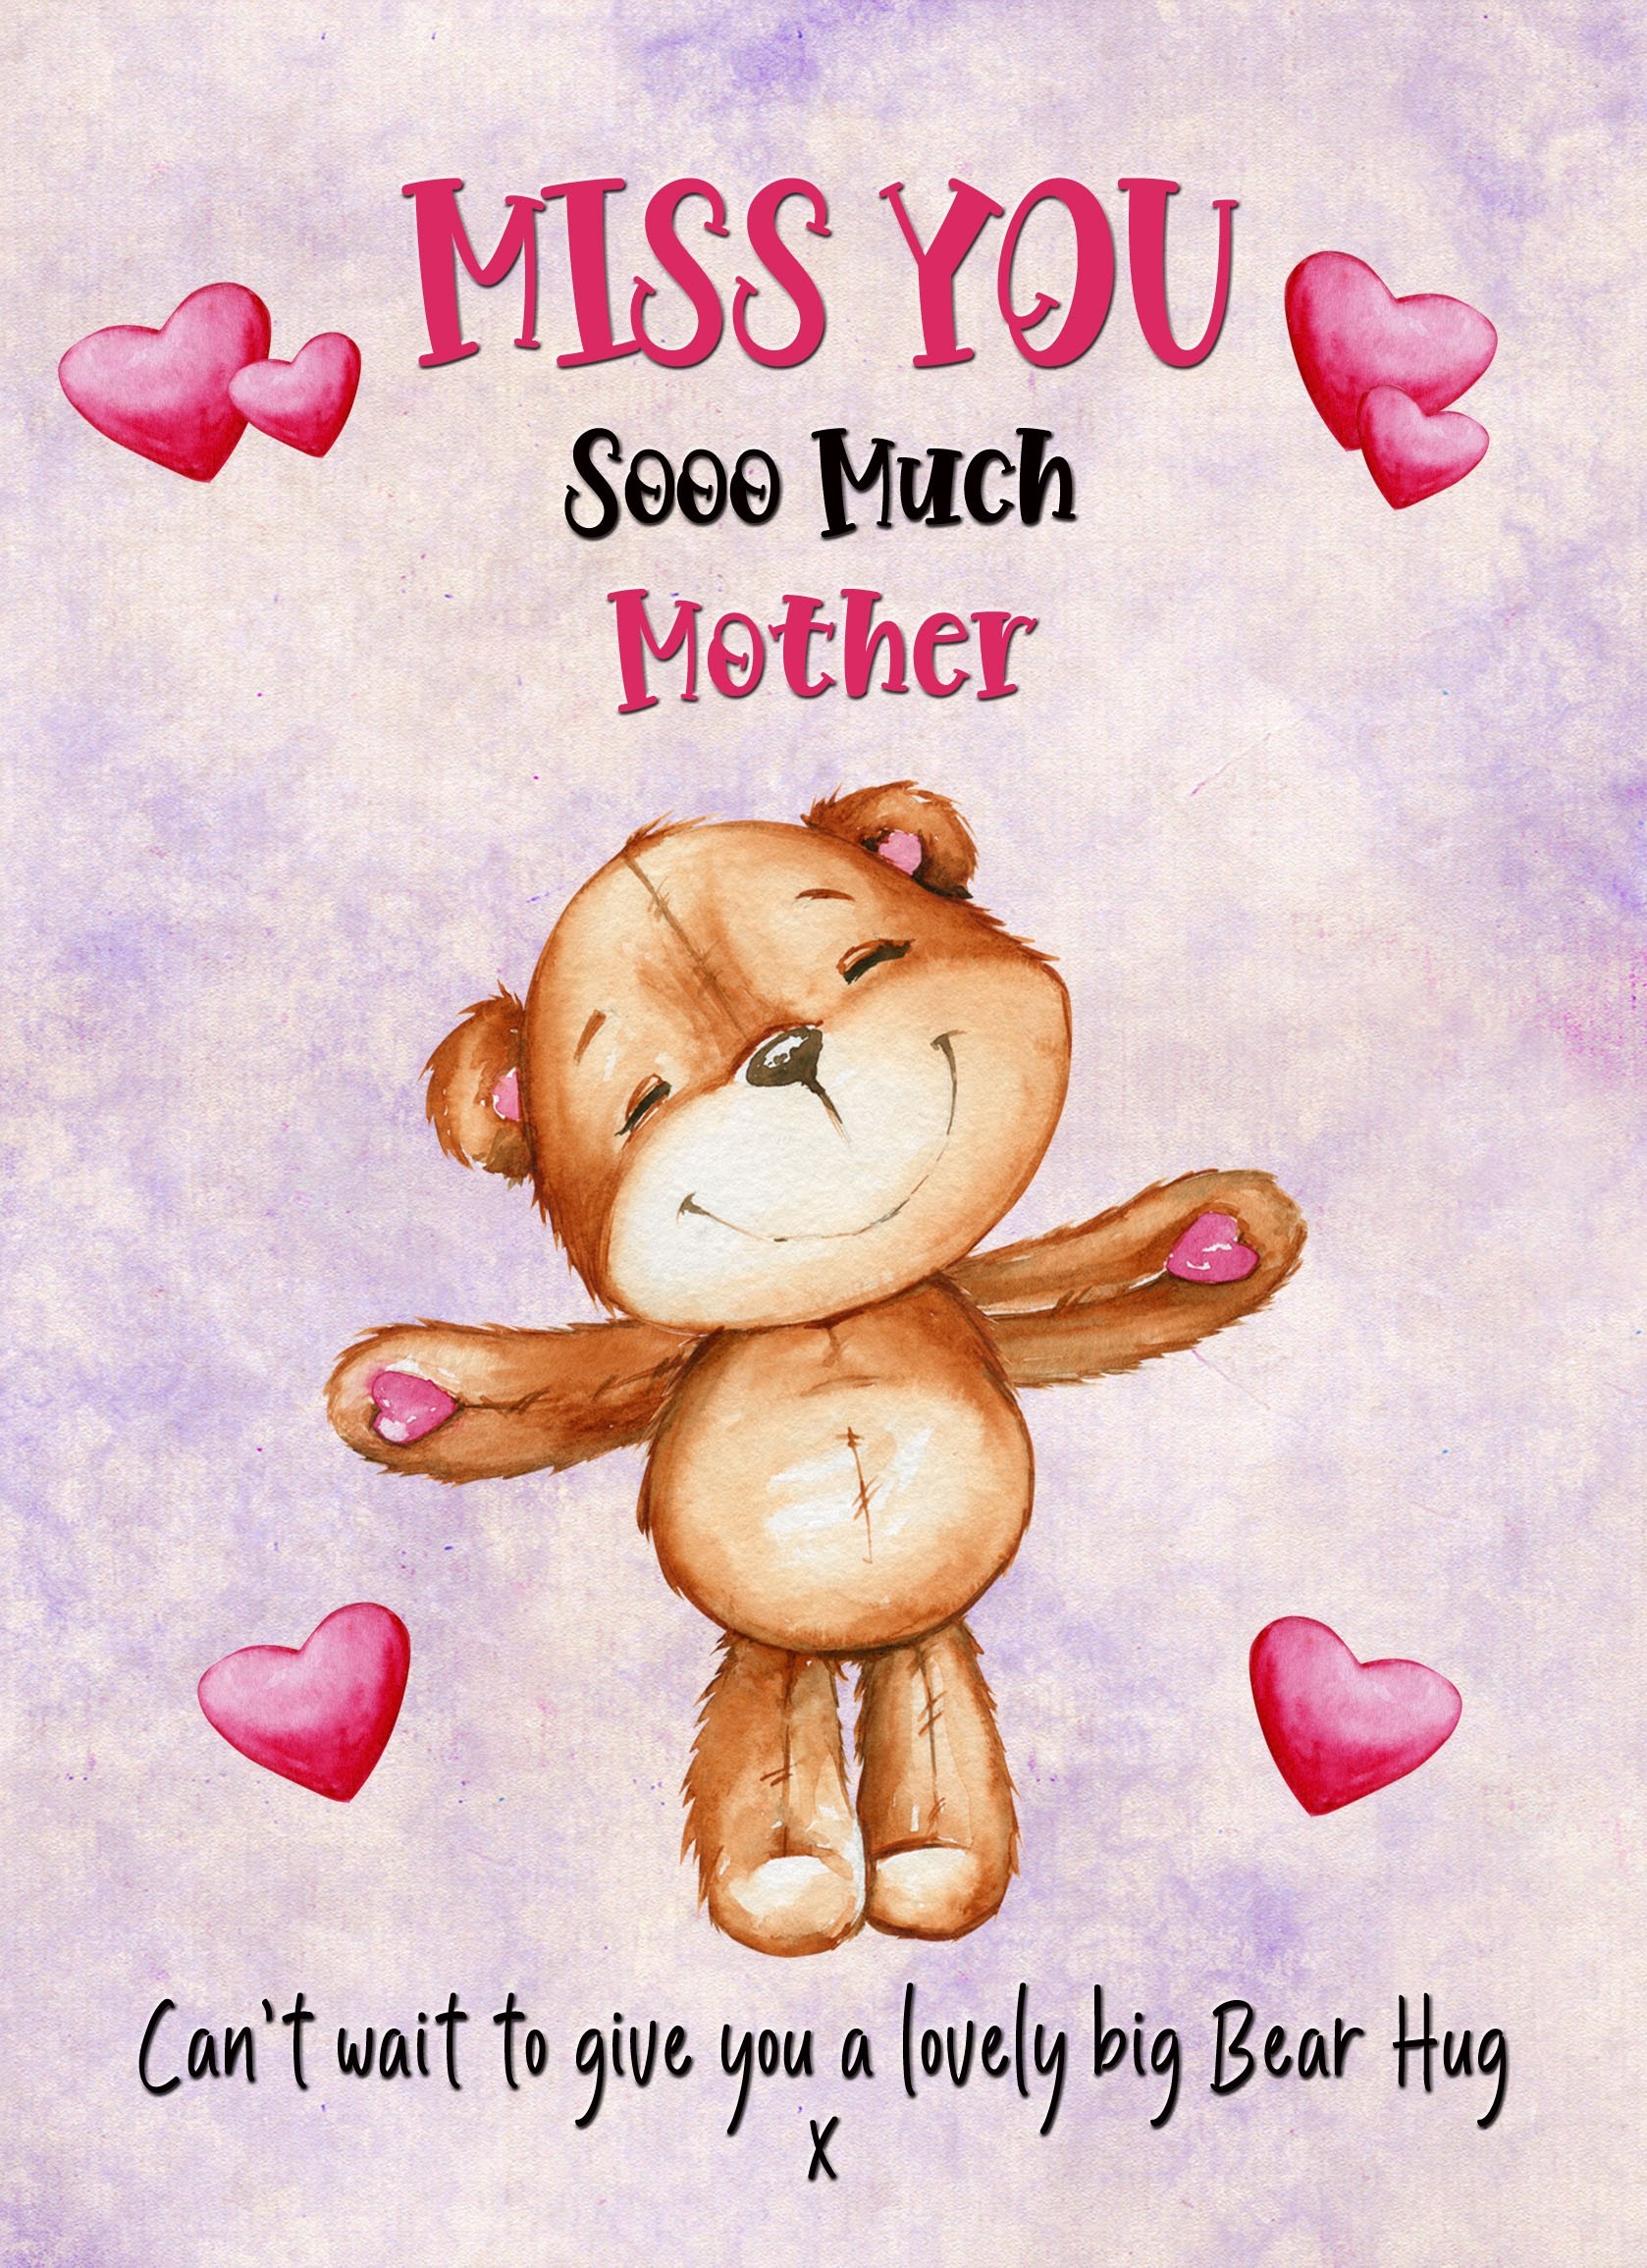 Missing You Card For Mother (Hearts)